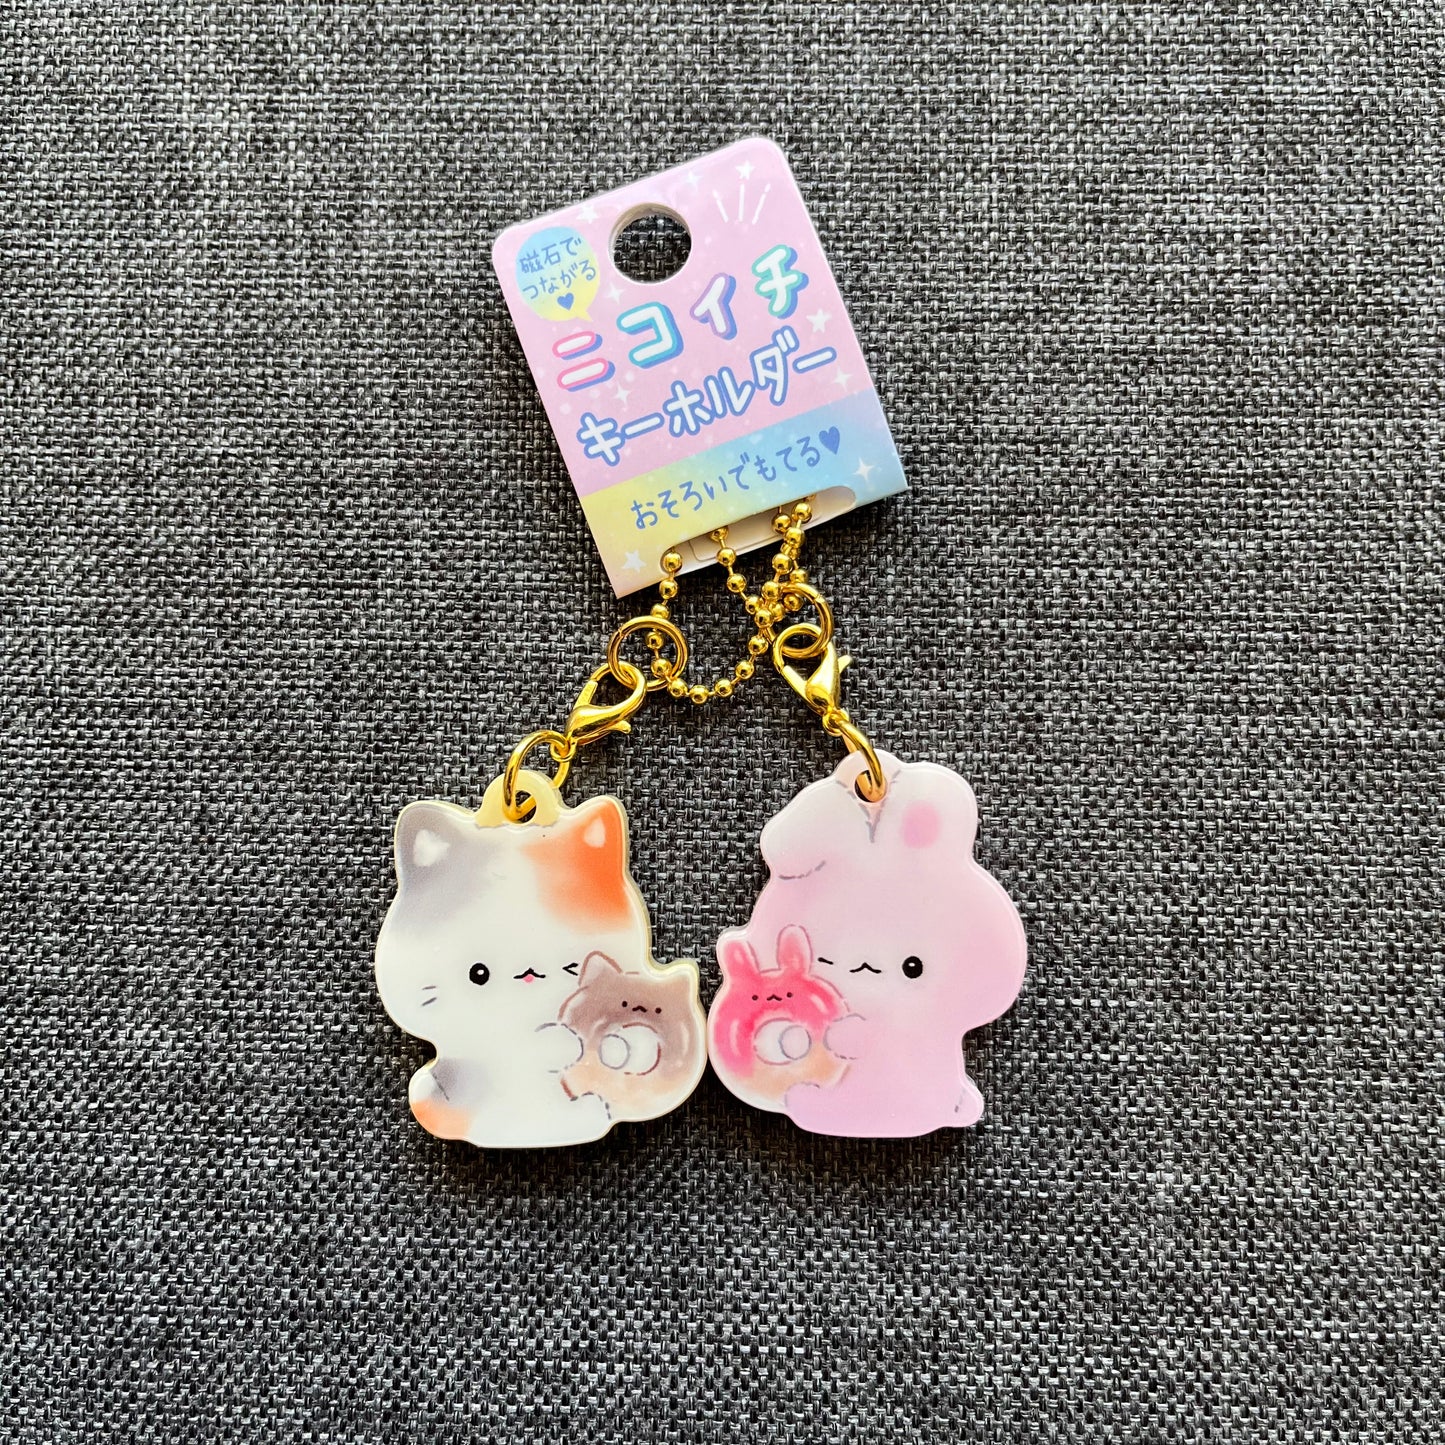 Calico Cat and Bunny Rabbit Magnetic Friendship Charms